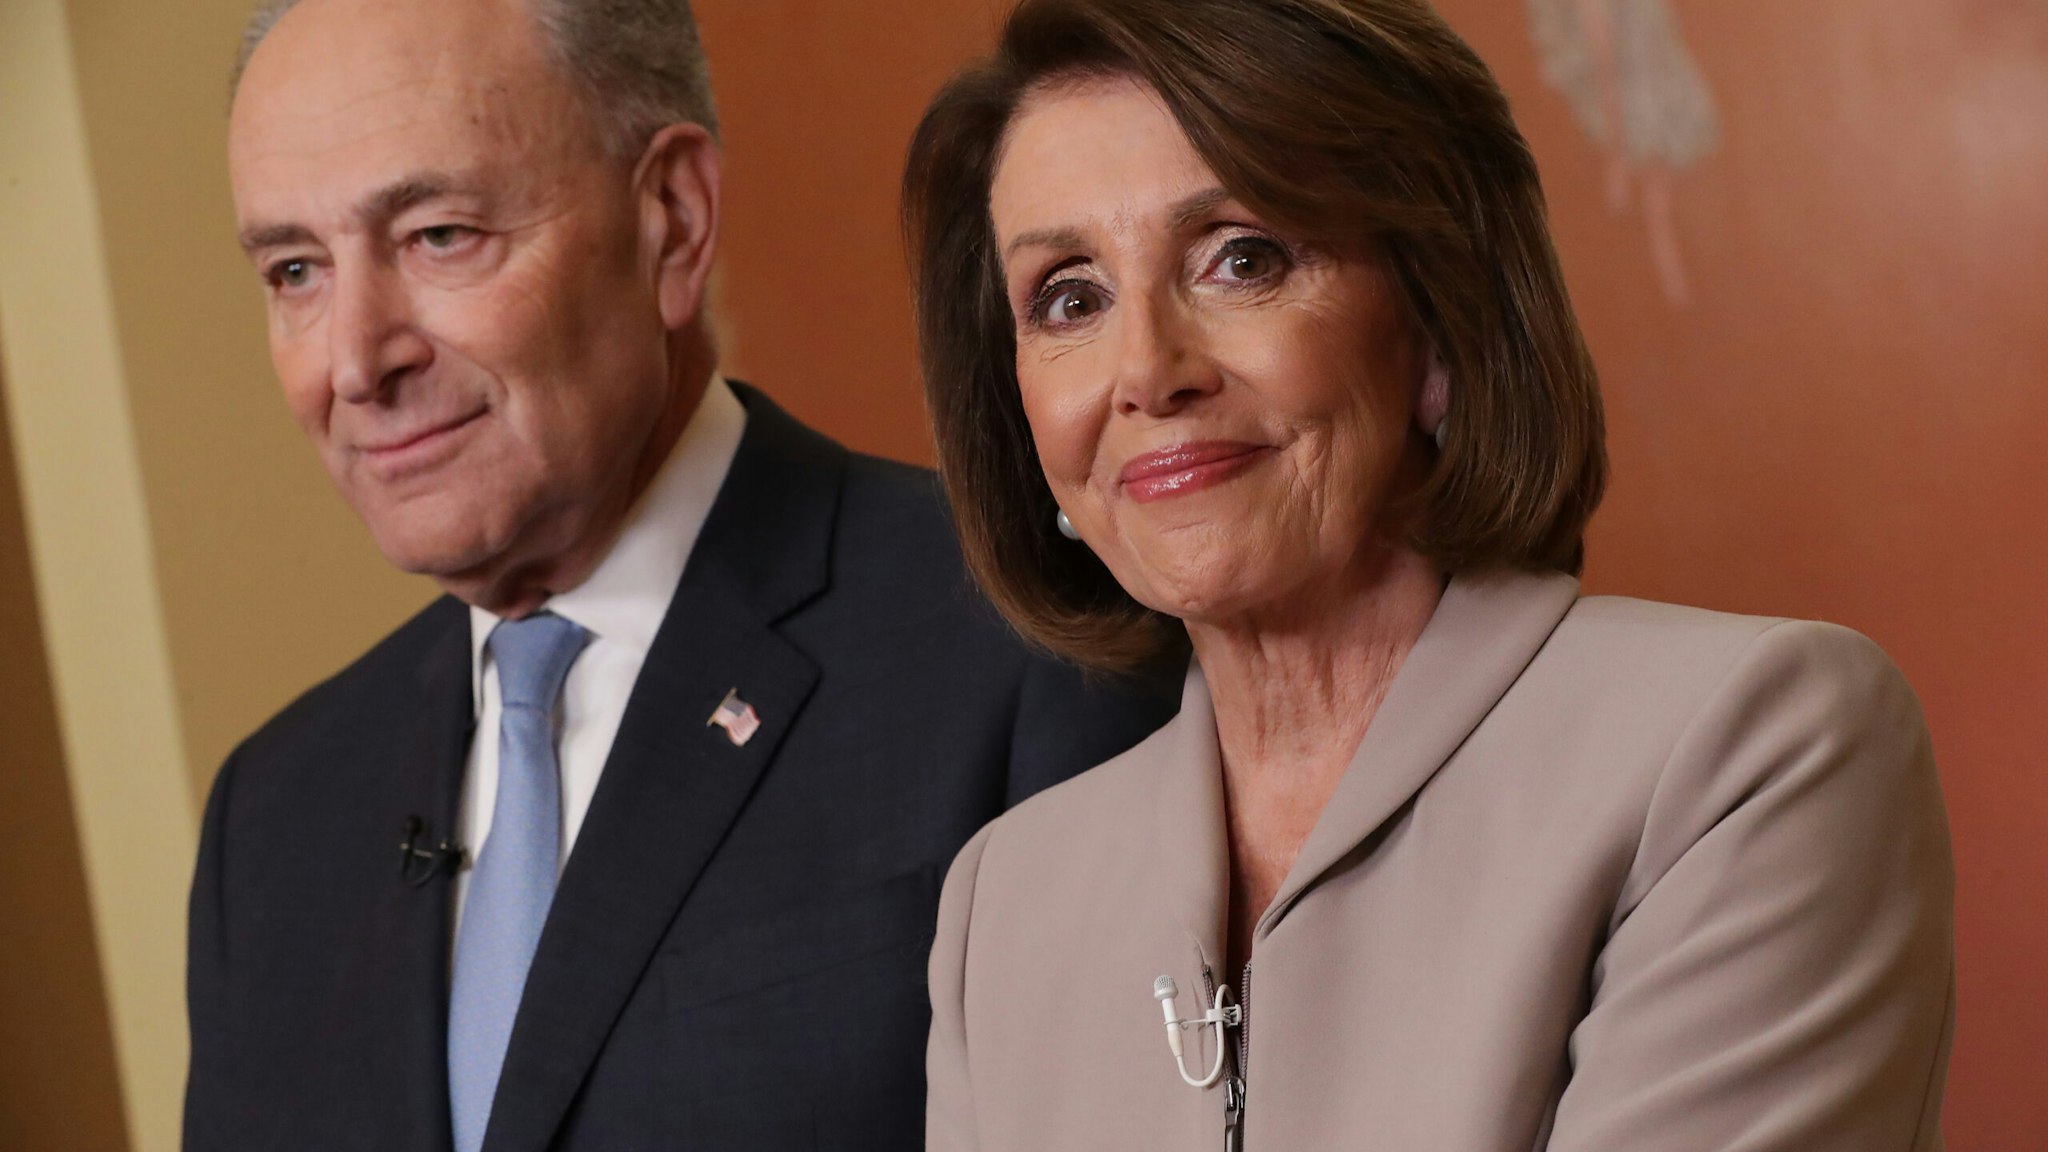 Speaker of the House Nancy Pelosi (D-CA) and Senate Minority Leader Charles Schumer (D-NY) pose for photographs after delivering a televised response to President Donald Trump's national address about border security at the U.S. Capitol January 08, 2019 in Washington, DC. Republicans and Democrats seem no closer to an agreement on security along the southern border and ending the partial federal government shutdown, the second-longest in history.